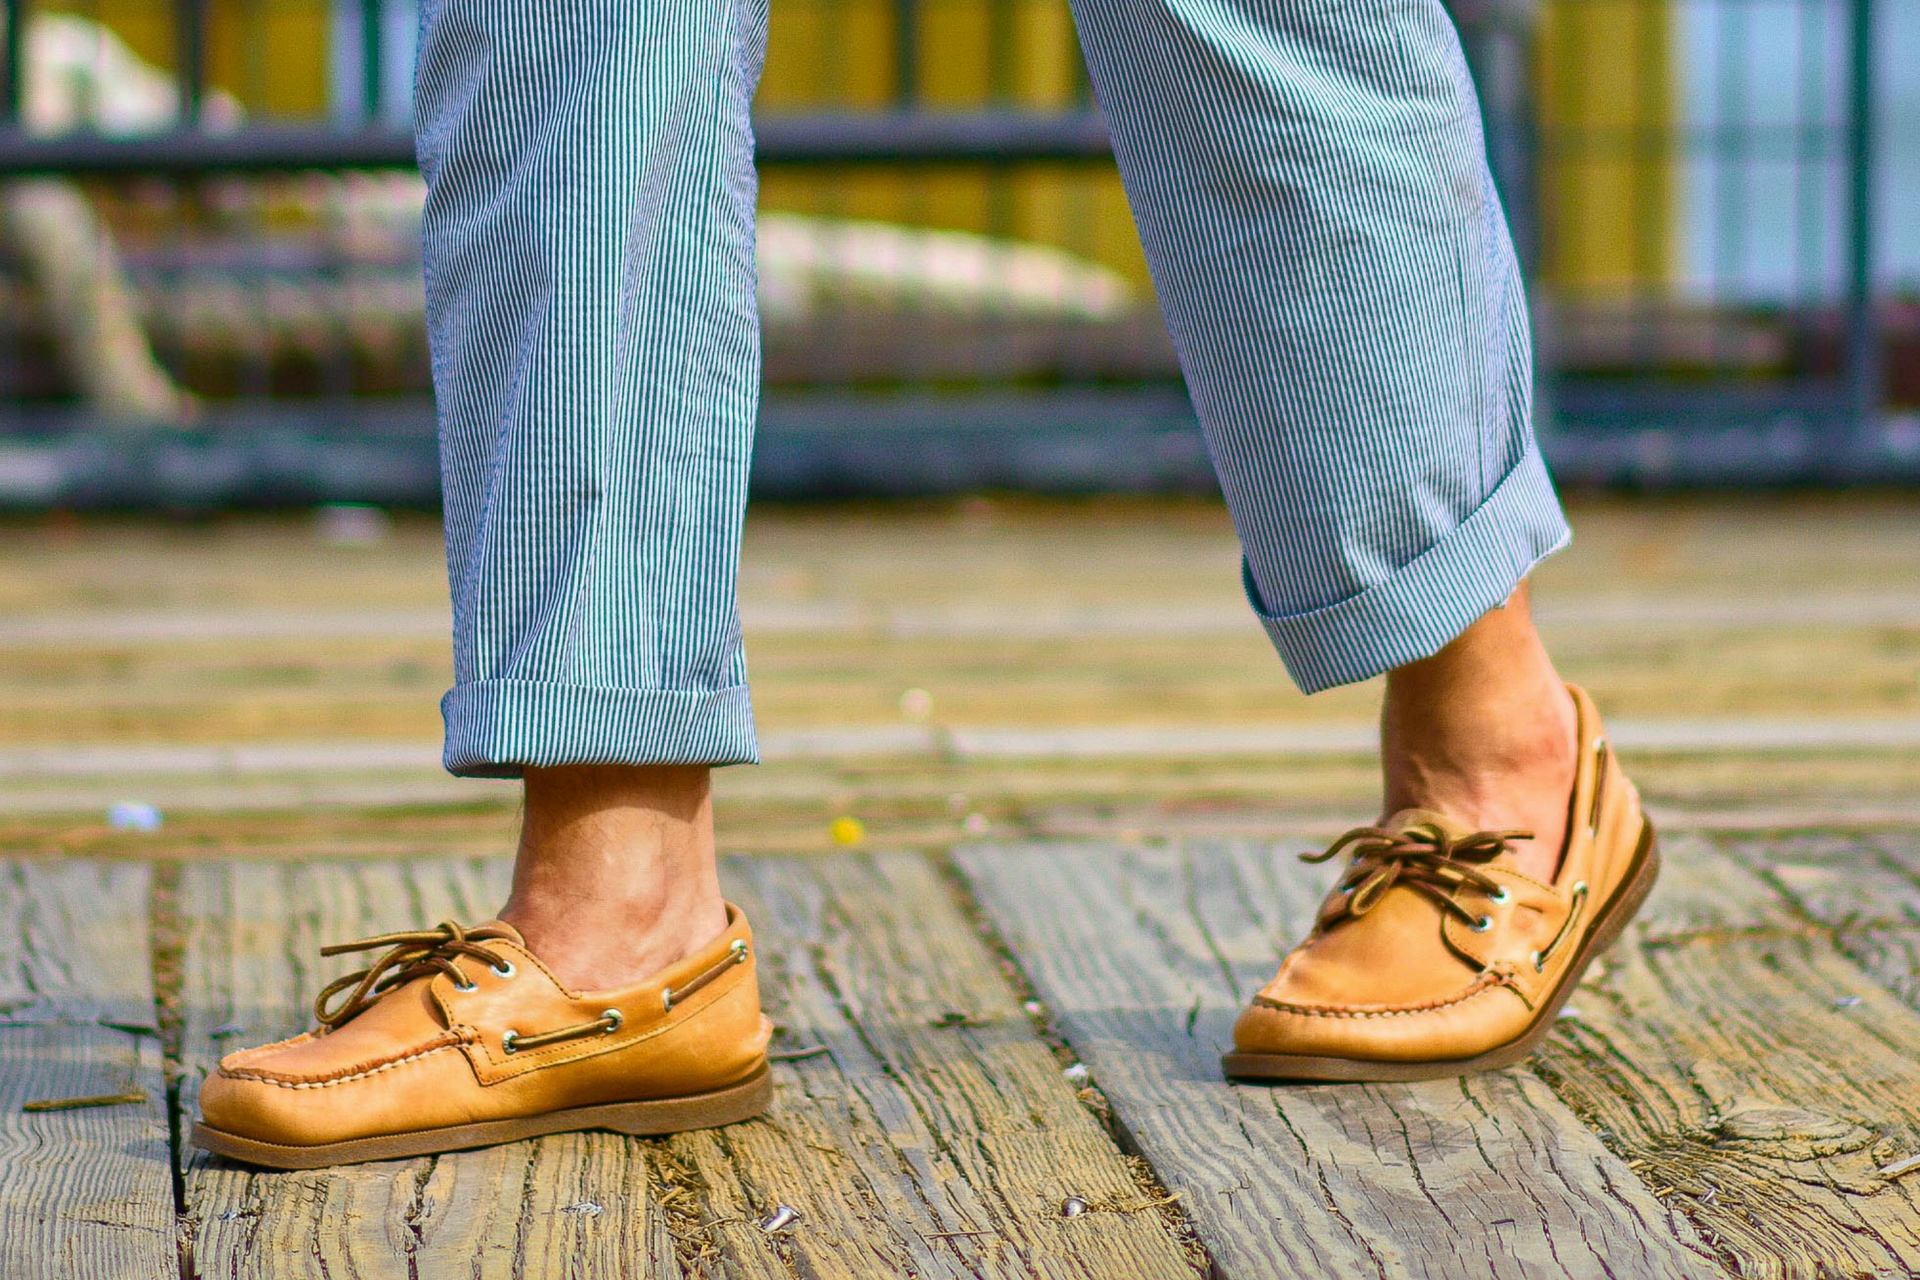 nautical-style-summer-inspiration-sperry-boat-shoes - dandy in the bronx